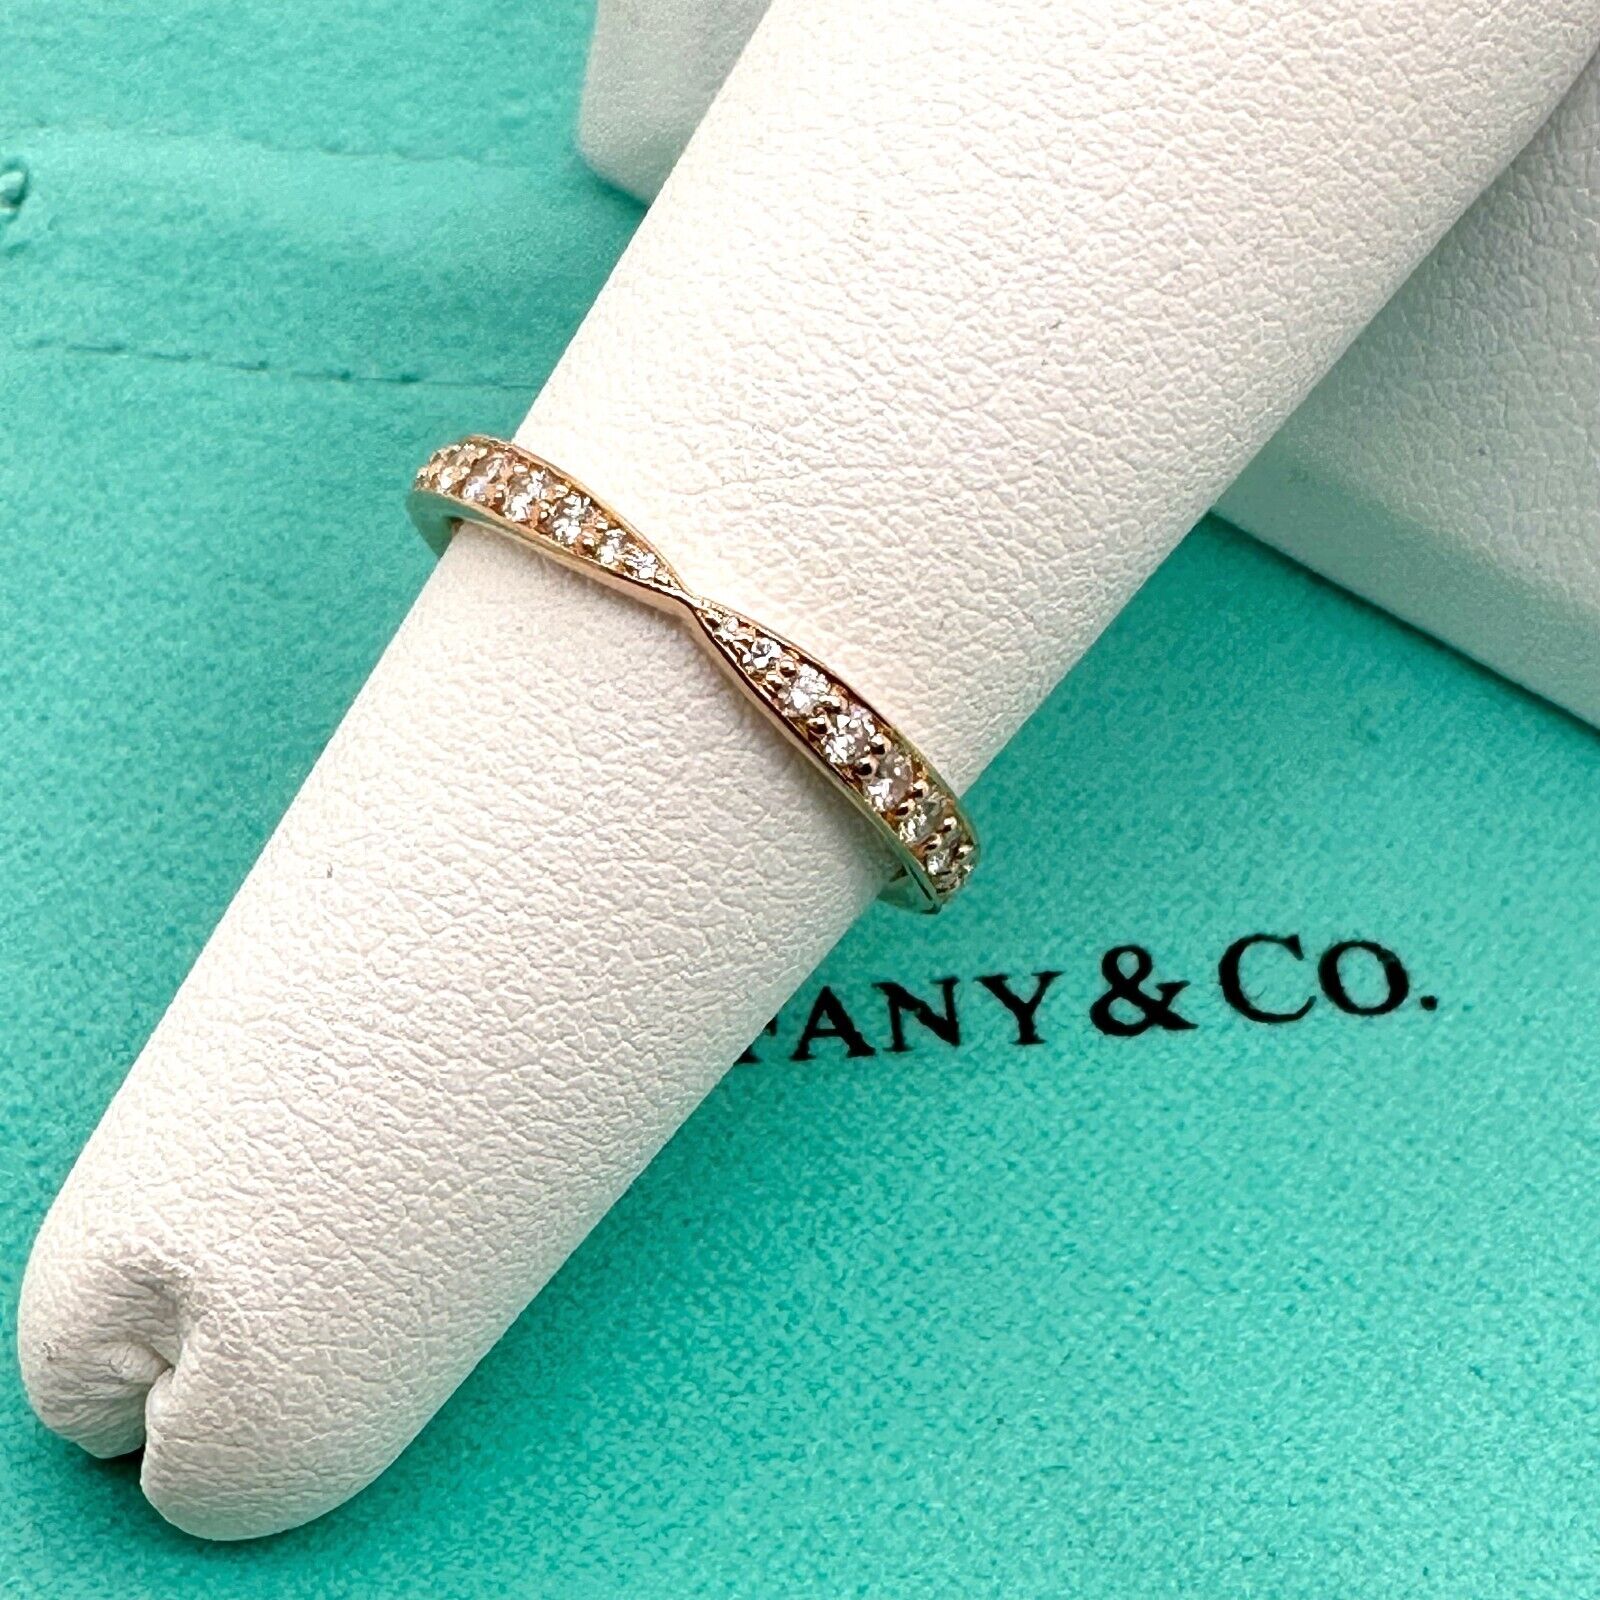 tiffany and co products